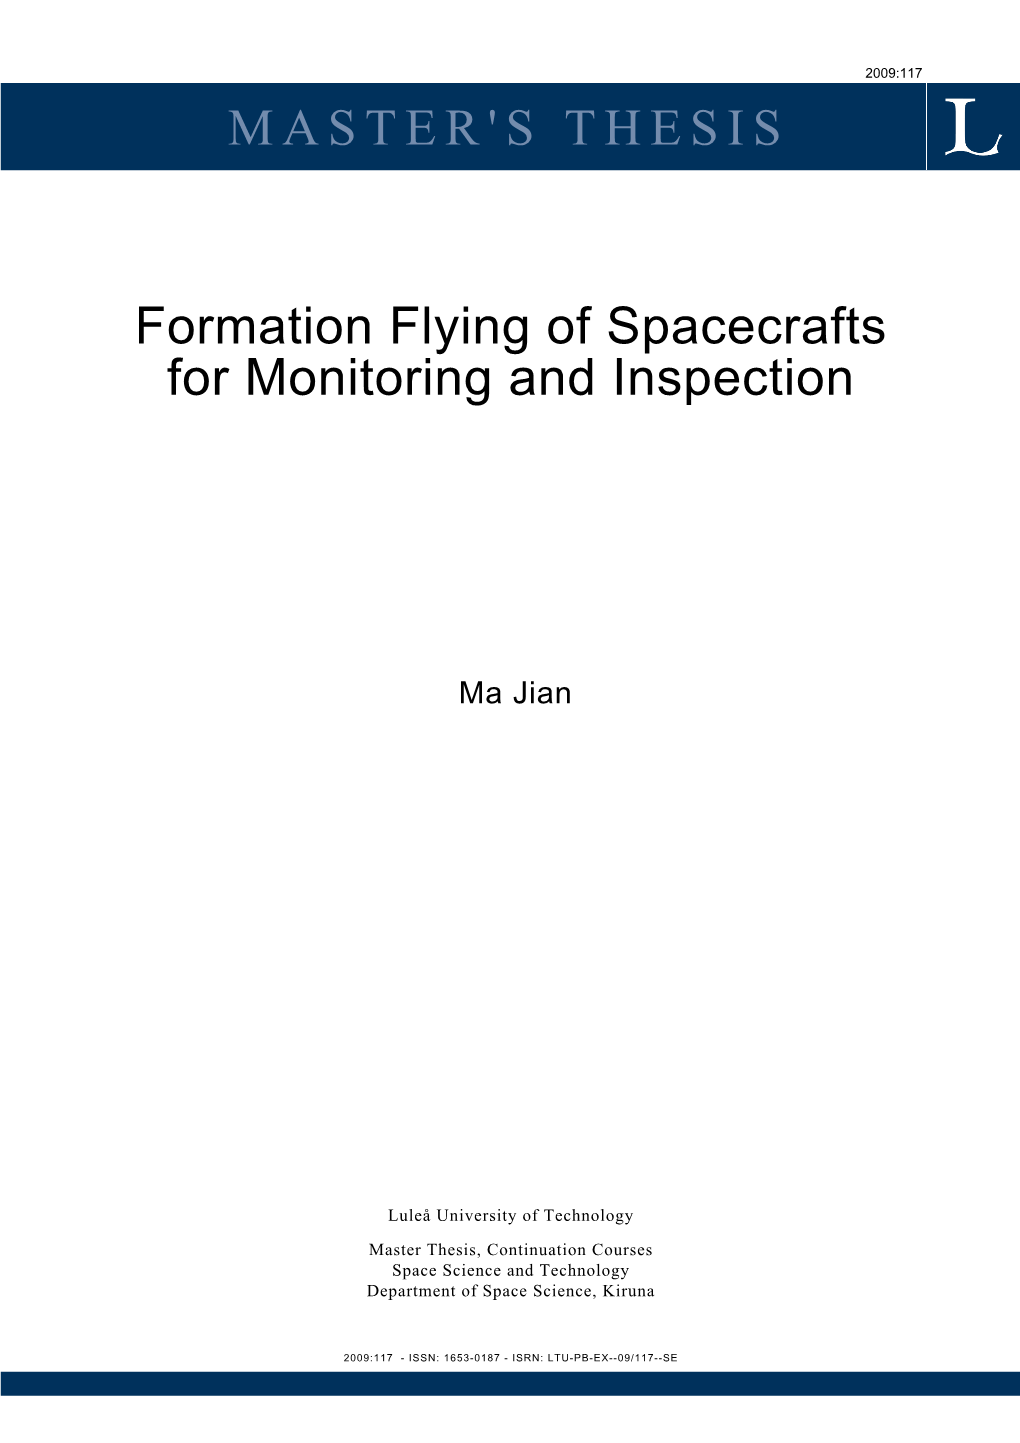 MASTER's THESIS Formation Flying of Spacecrafts for Monitoring And